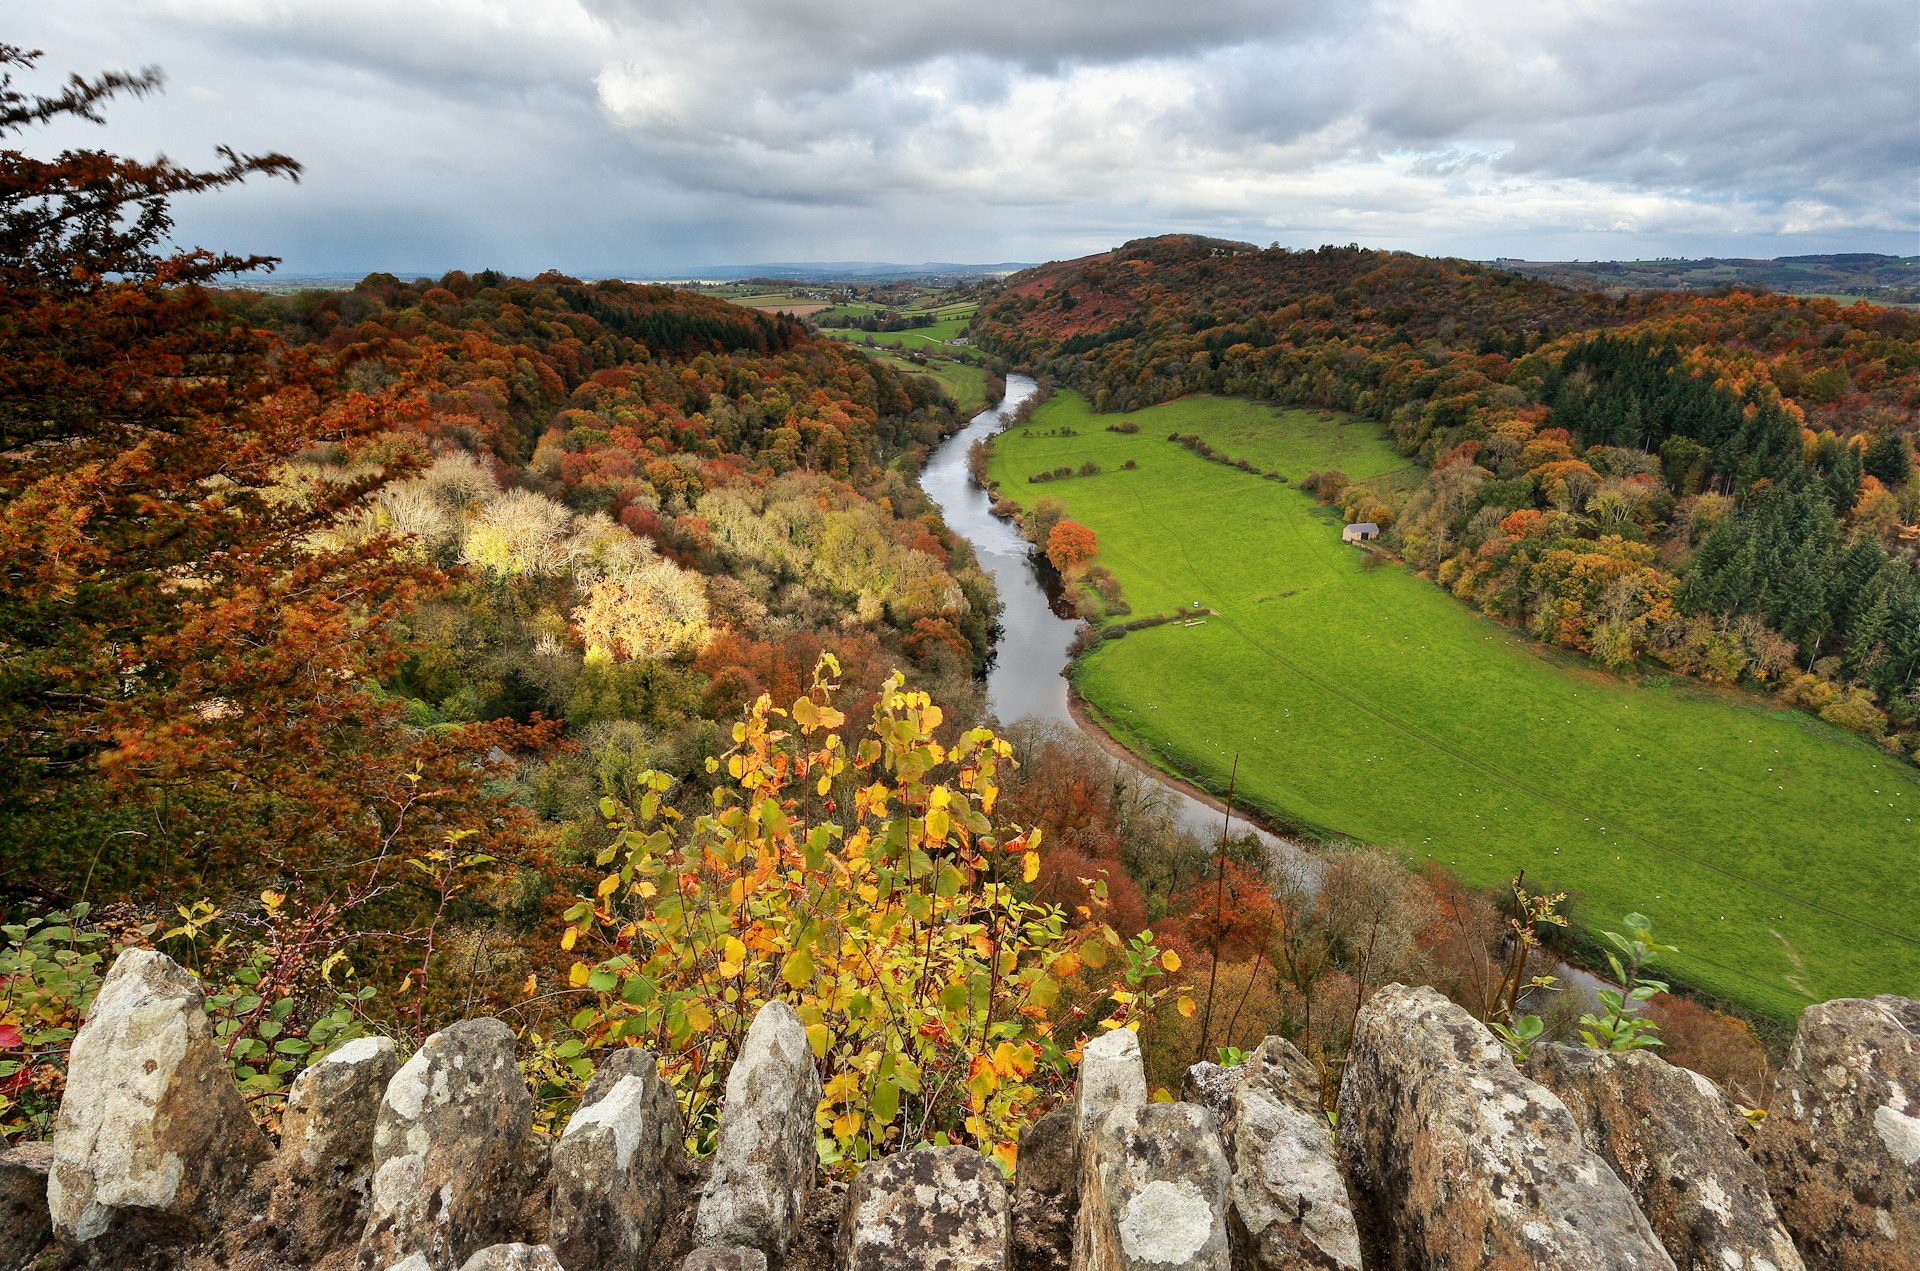 A view of the River Wye in the Forest of Dean, England